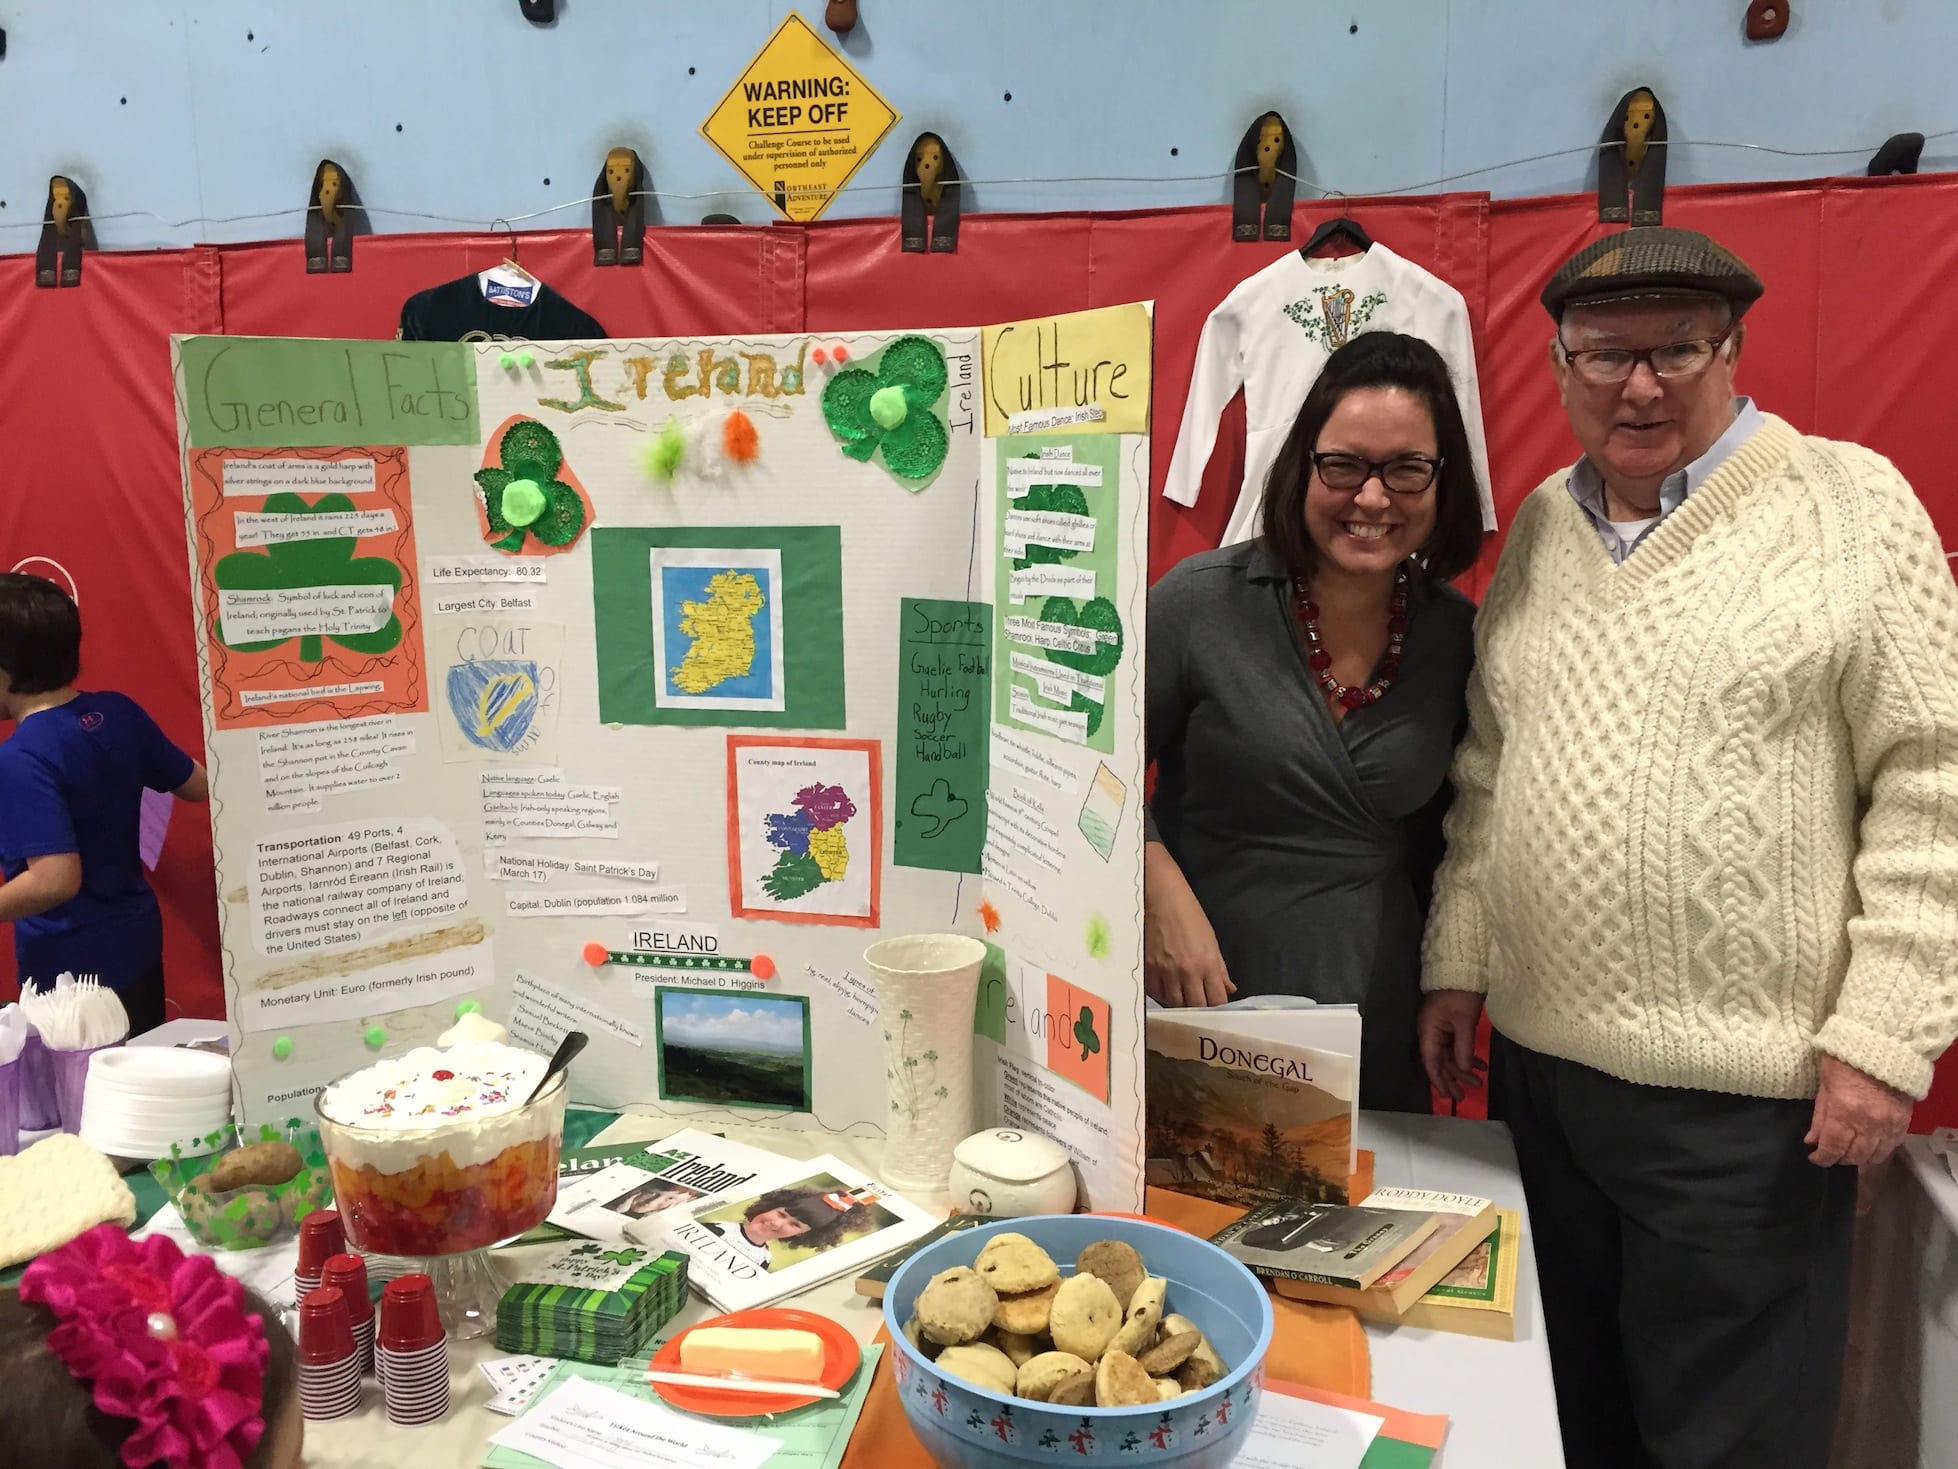 Ireland booth at Norfeldt International Night. Submitted photo